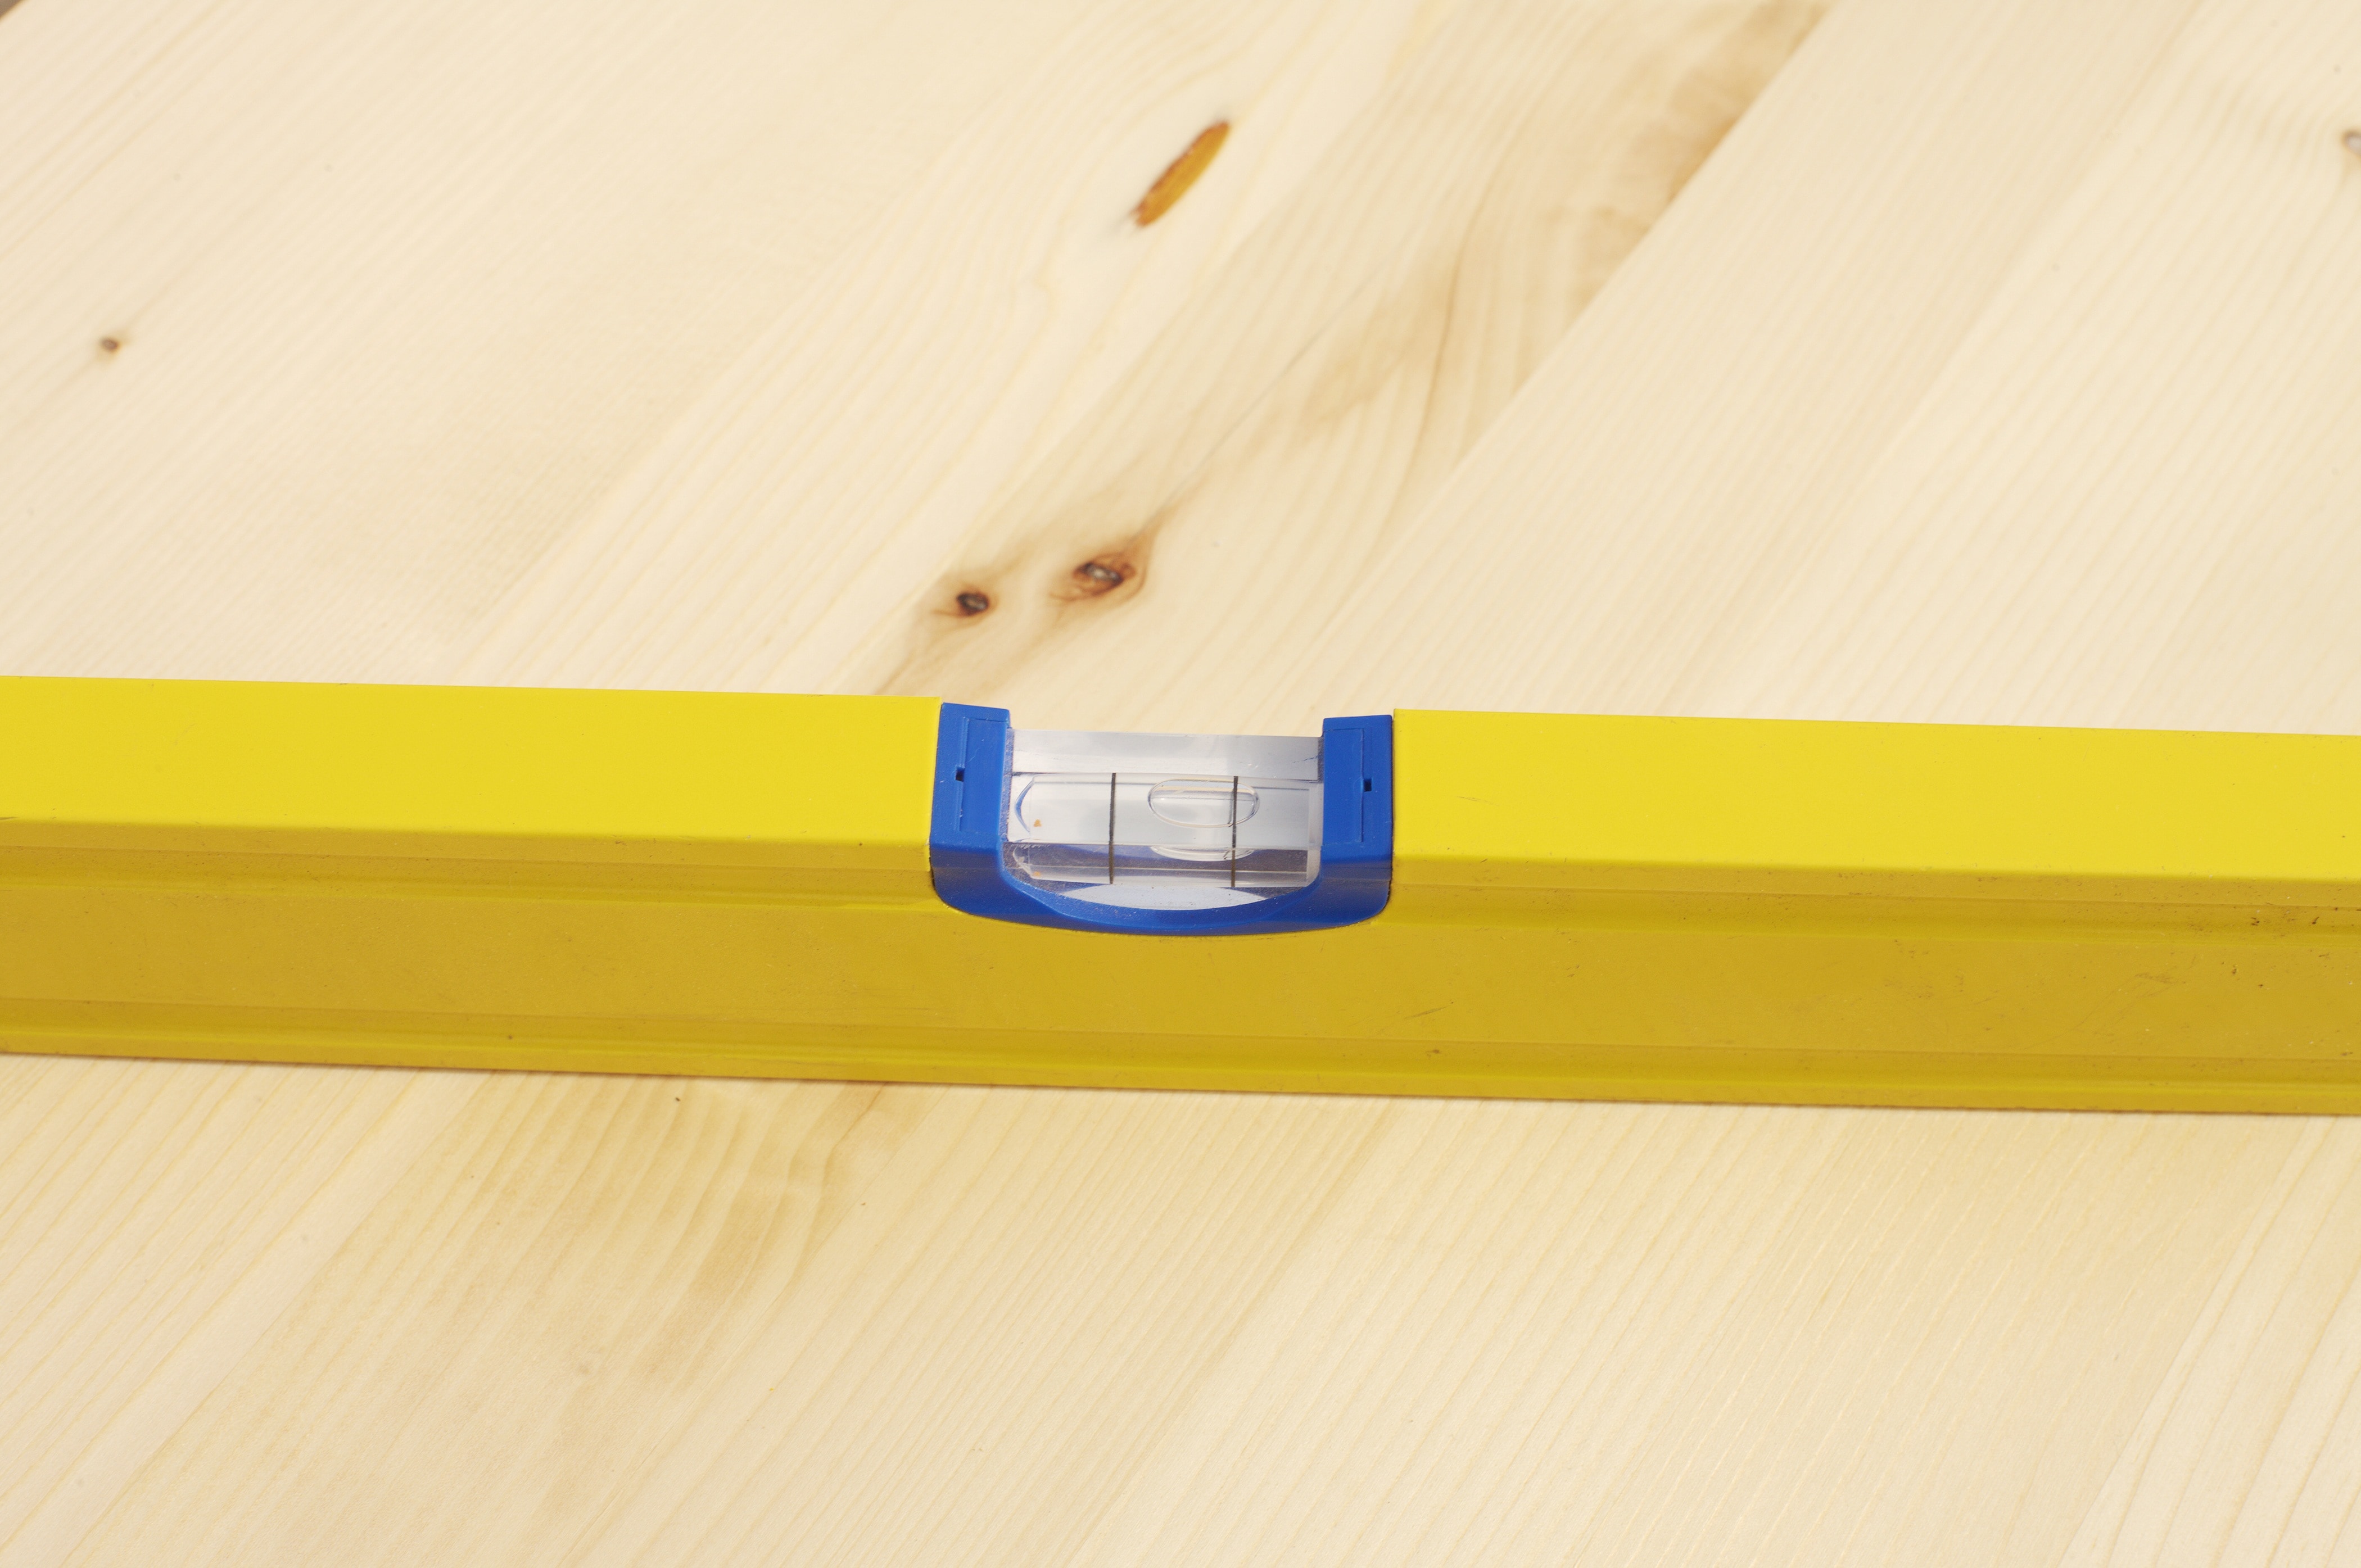 Tool, Water Venture, Wooden Board, Diy, network connection plug, yellow